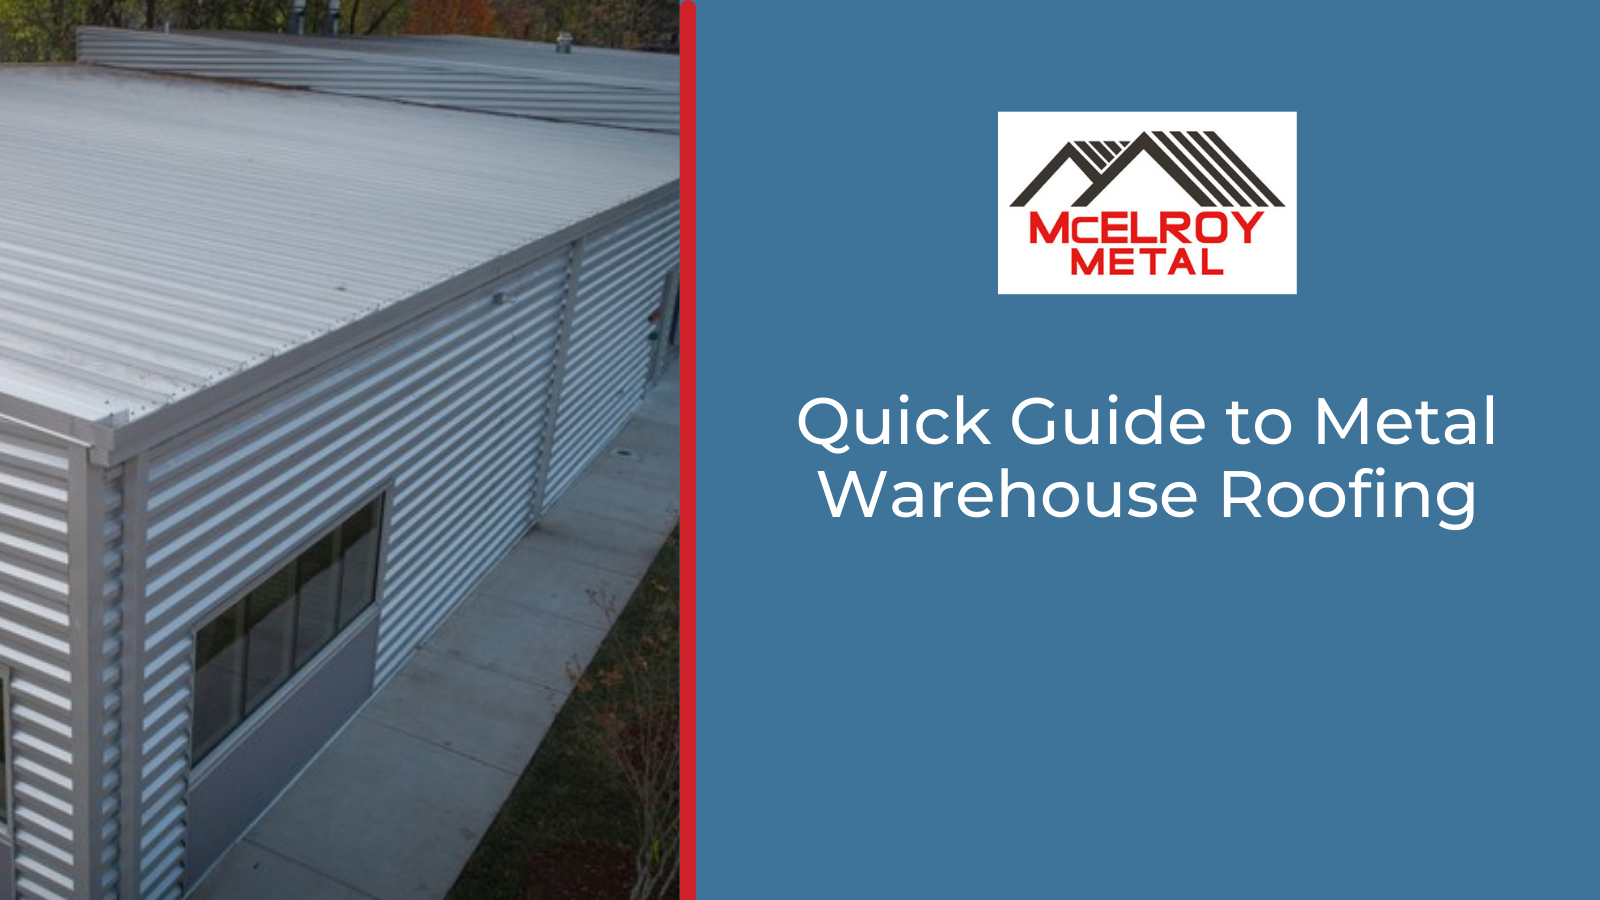 Quick Guide to Metal Warehouse Roofing